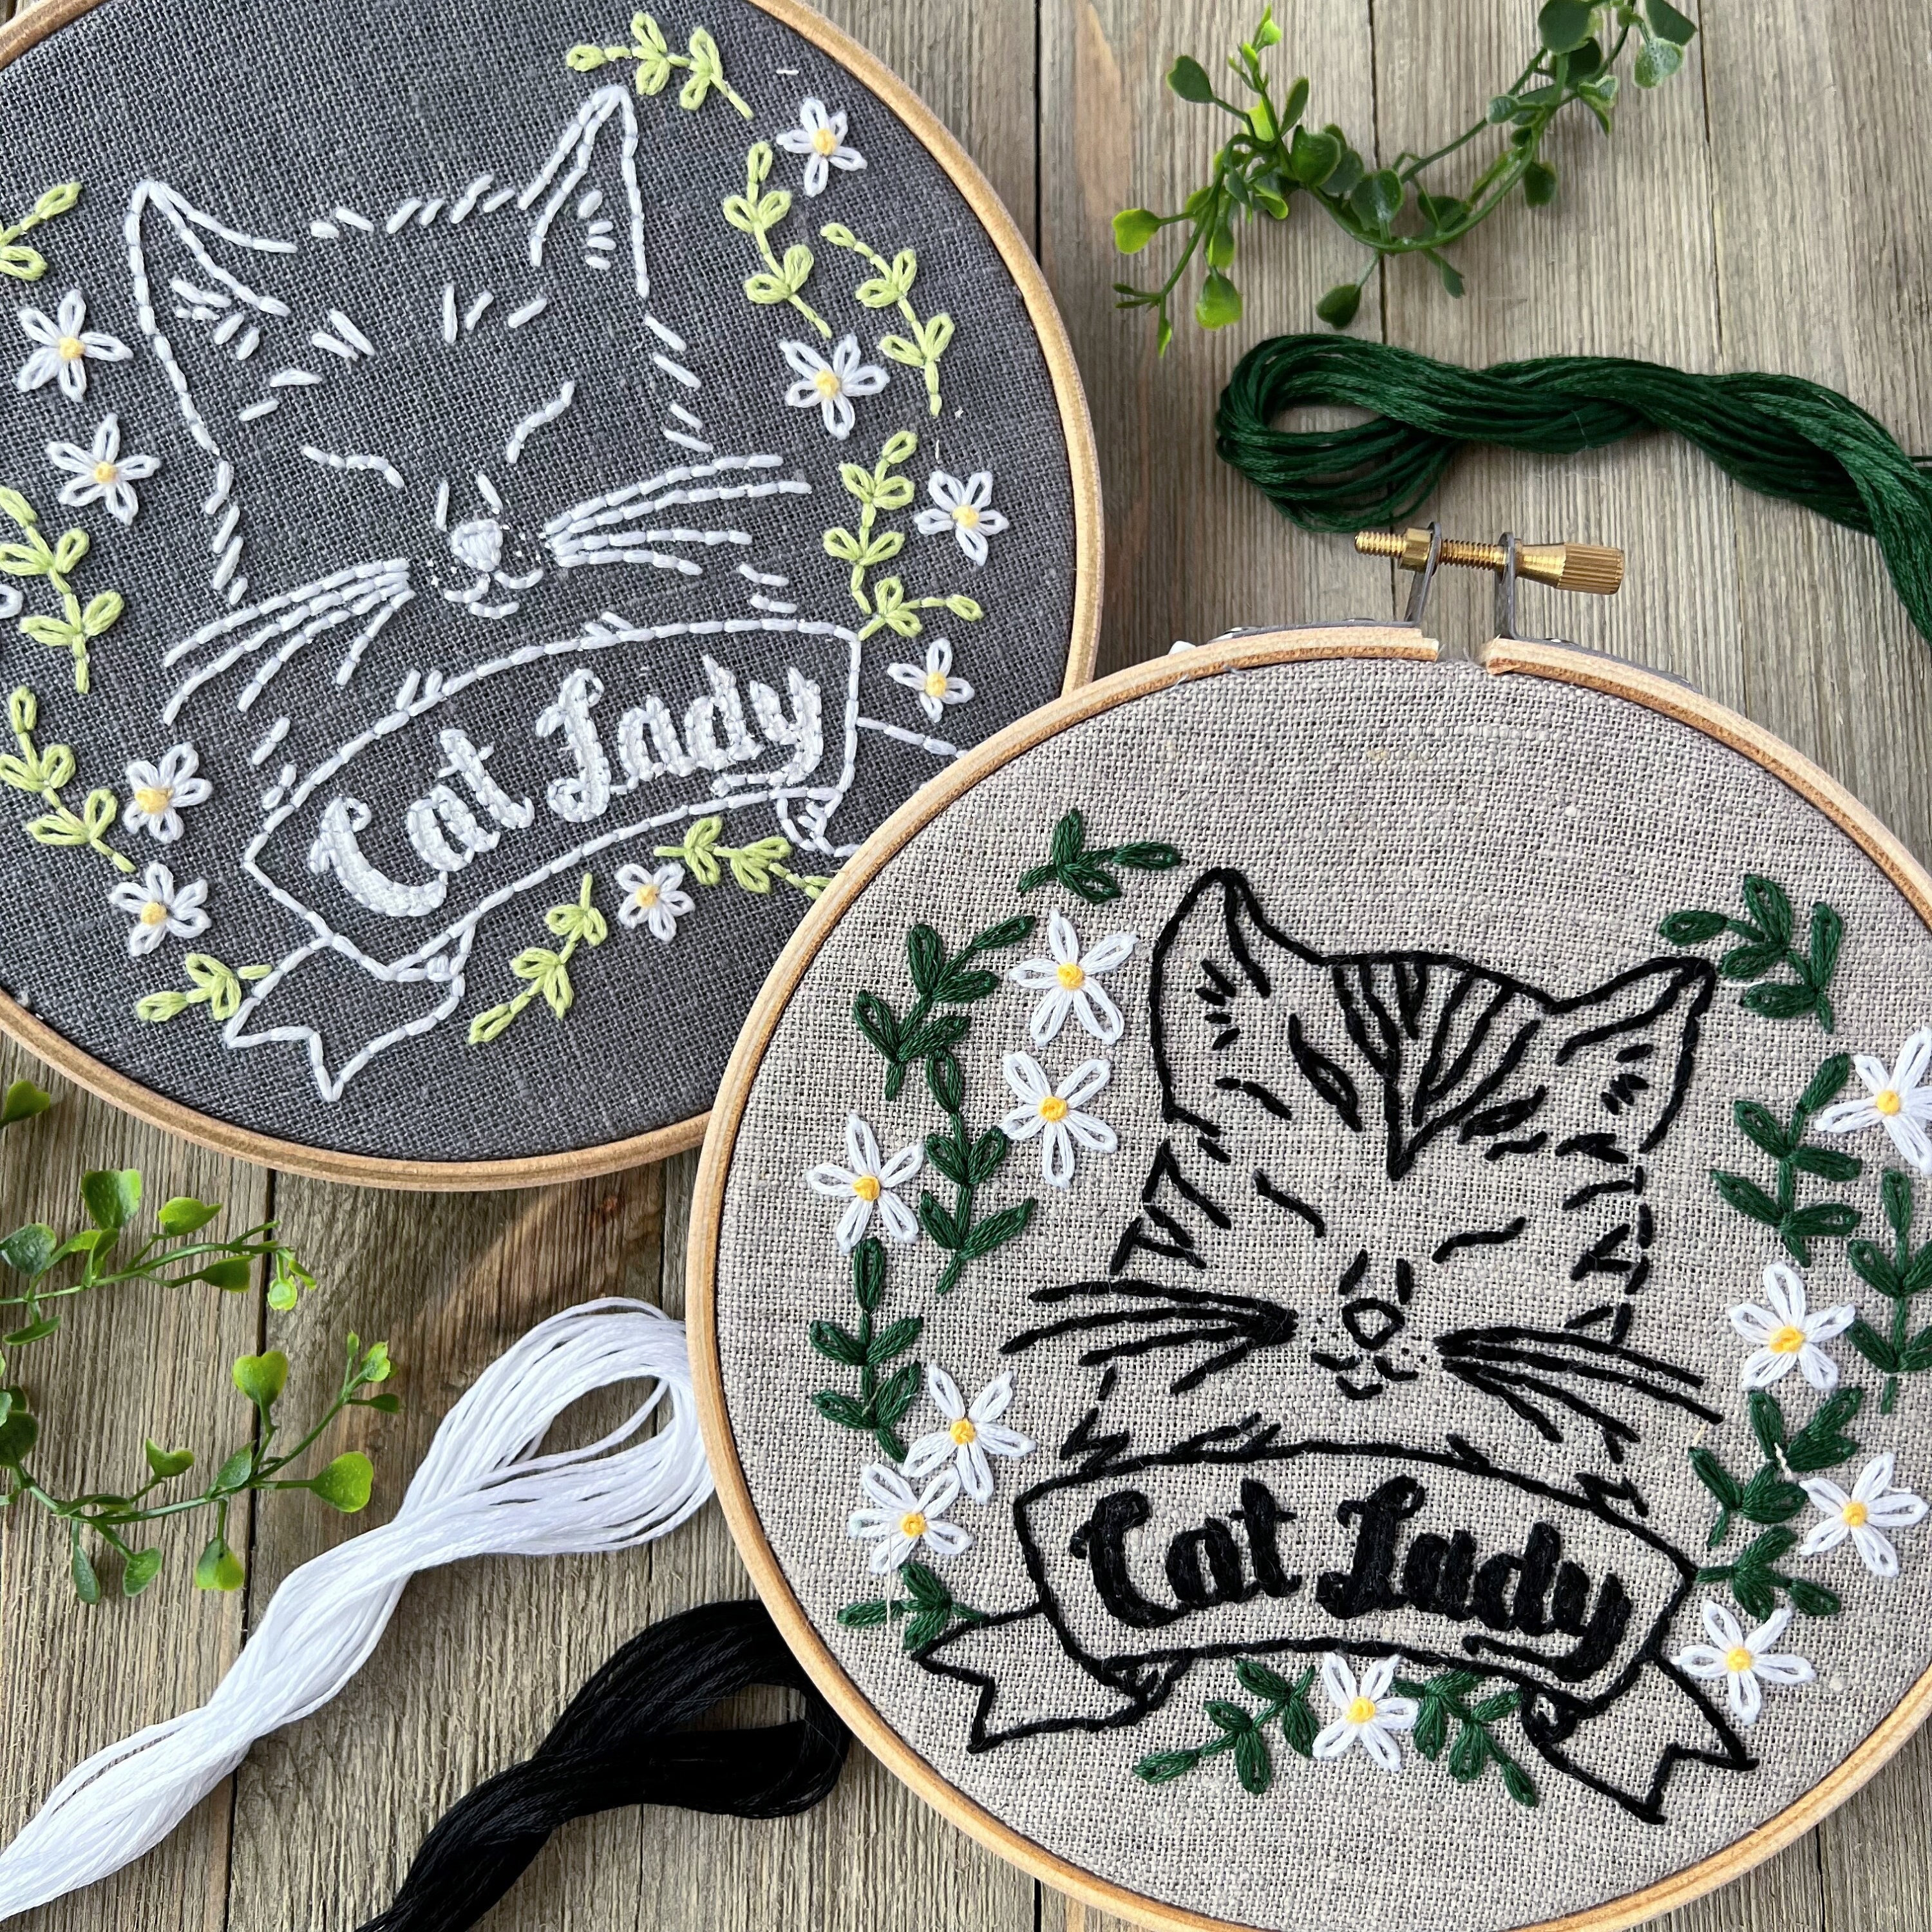 Cat Lady Embroidery Kit: Easy Modern Embroidery -  Hong Kong